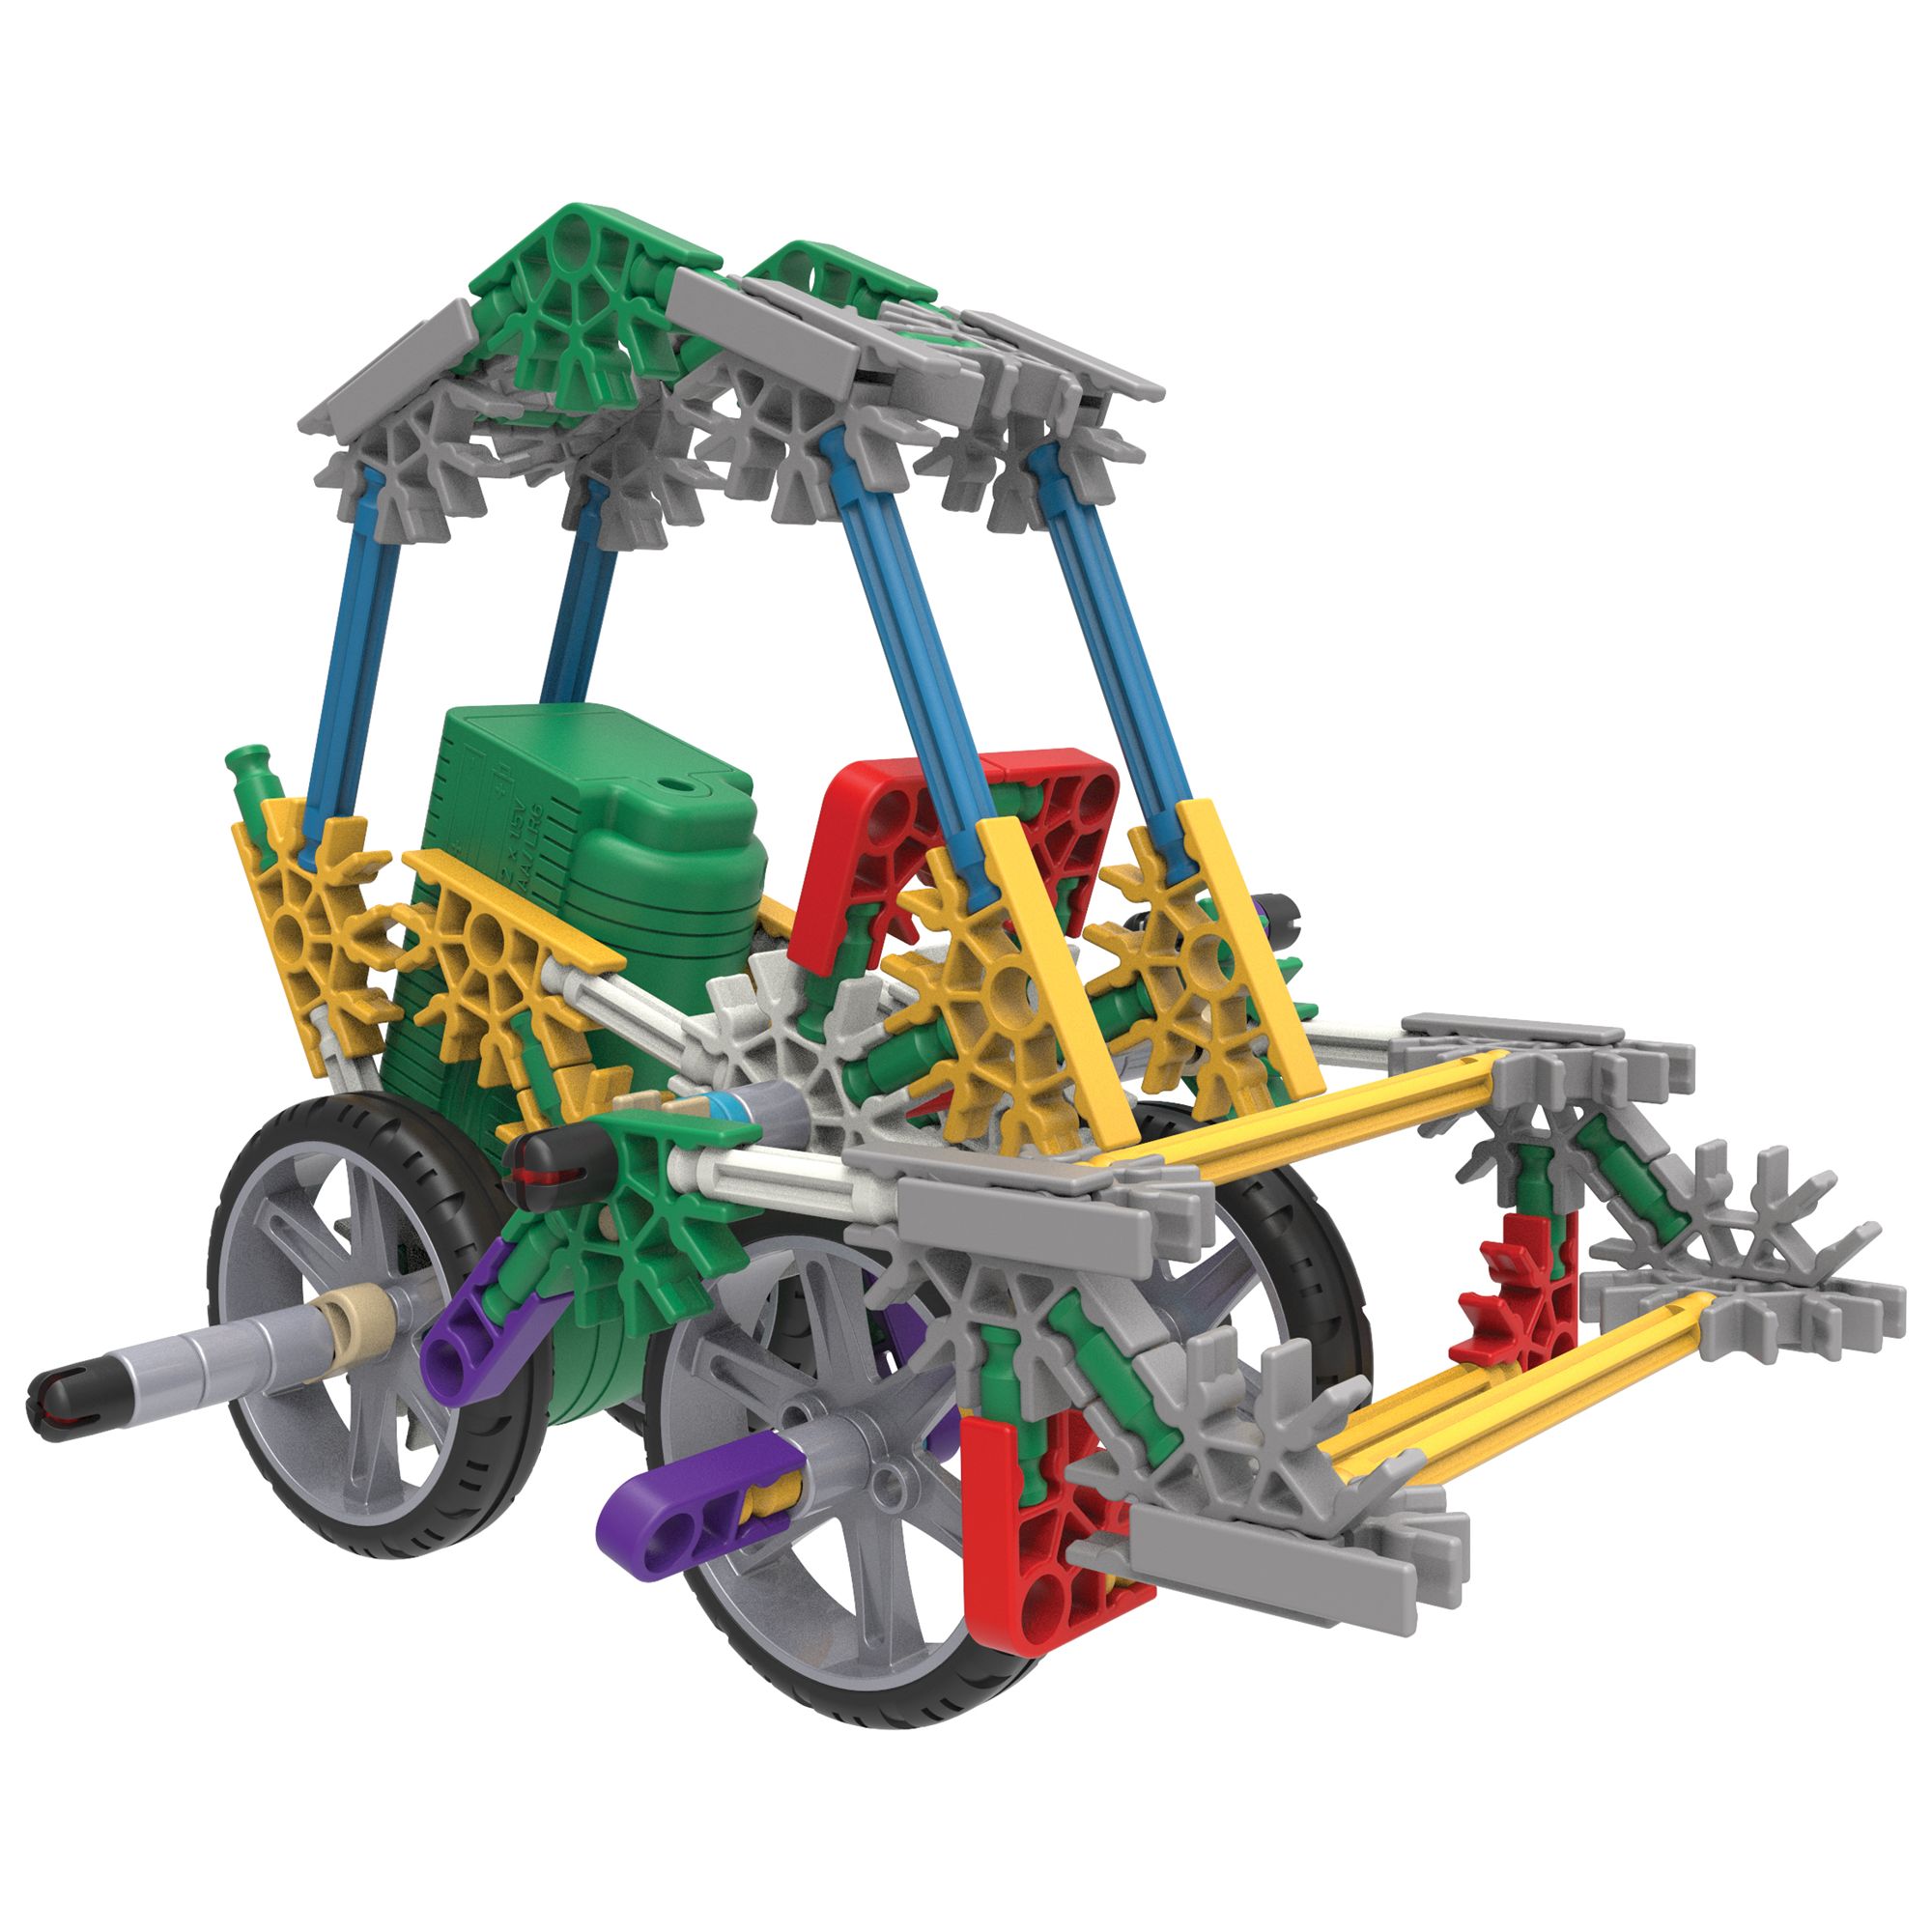 knex power and play